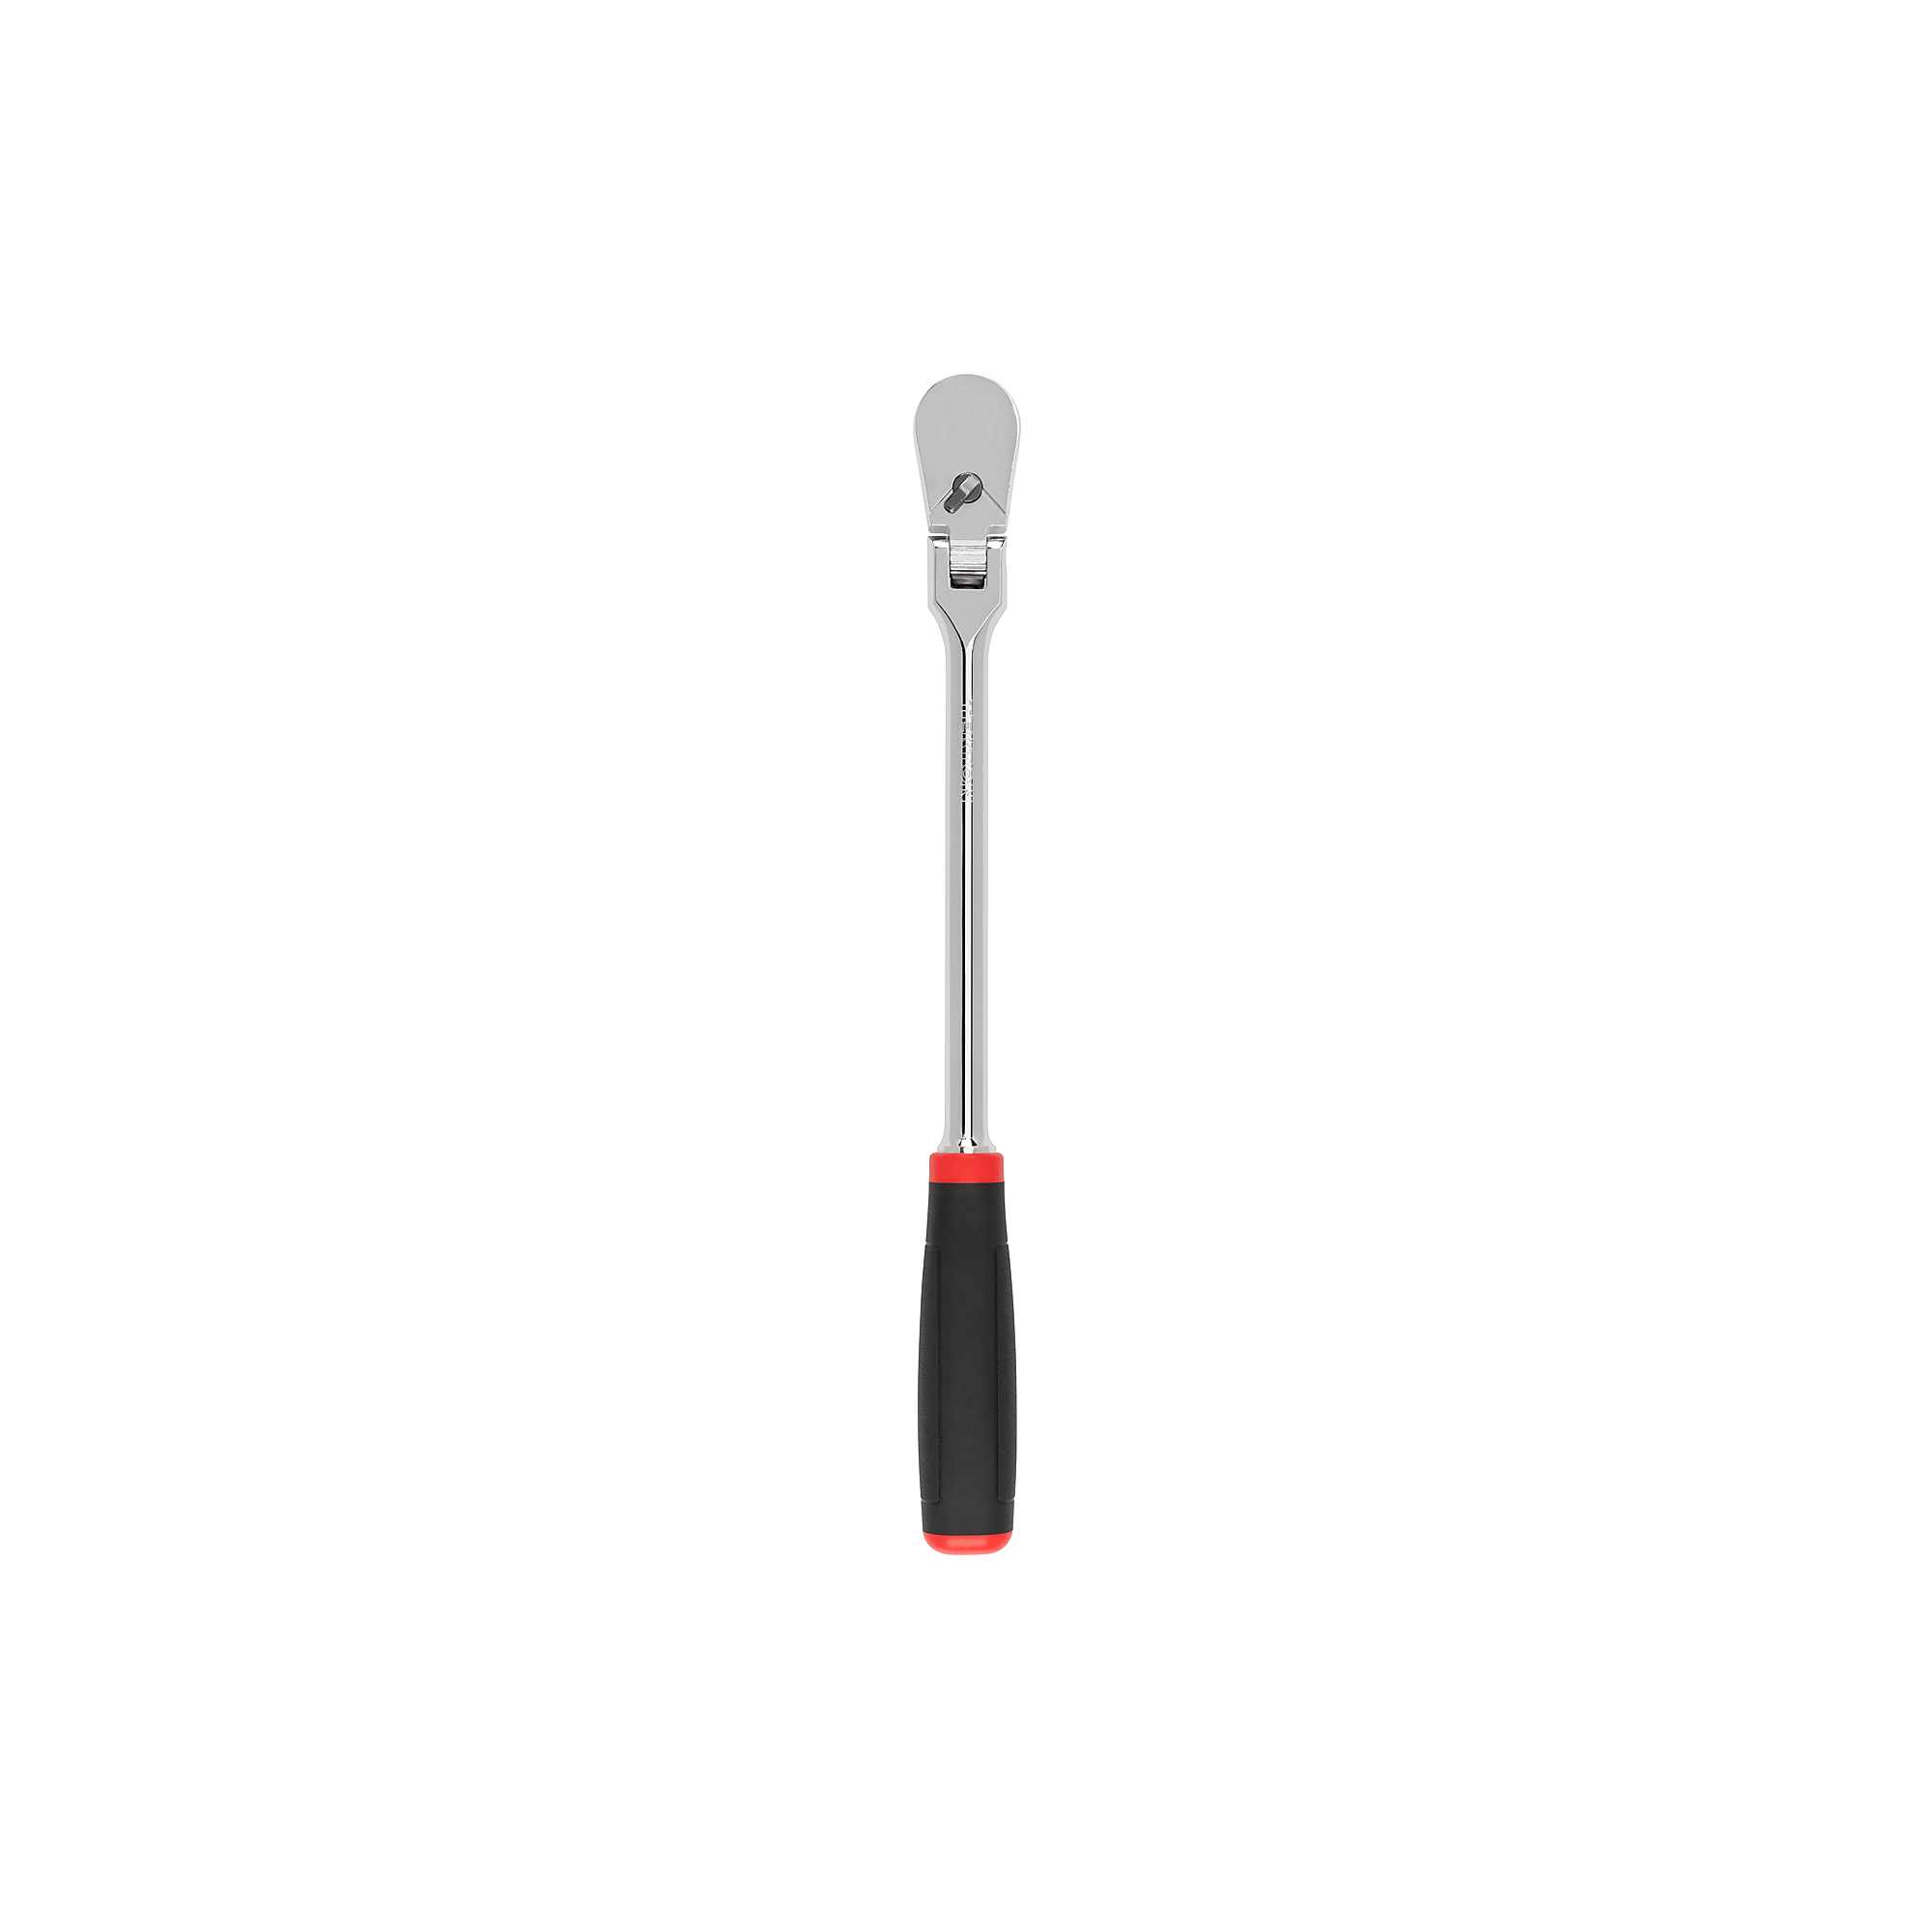 Tekton, 3/8Inch Drive x 12Inch Flex Comfort Grip Ratchet, Drive Size 3/8 in, Tool Length 12 in, Pieces (qty.) 1 Model SRH22112